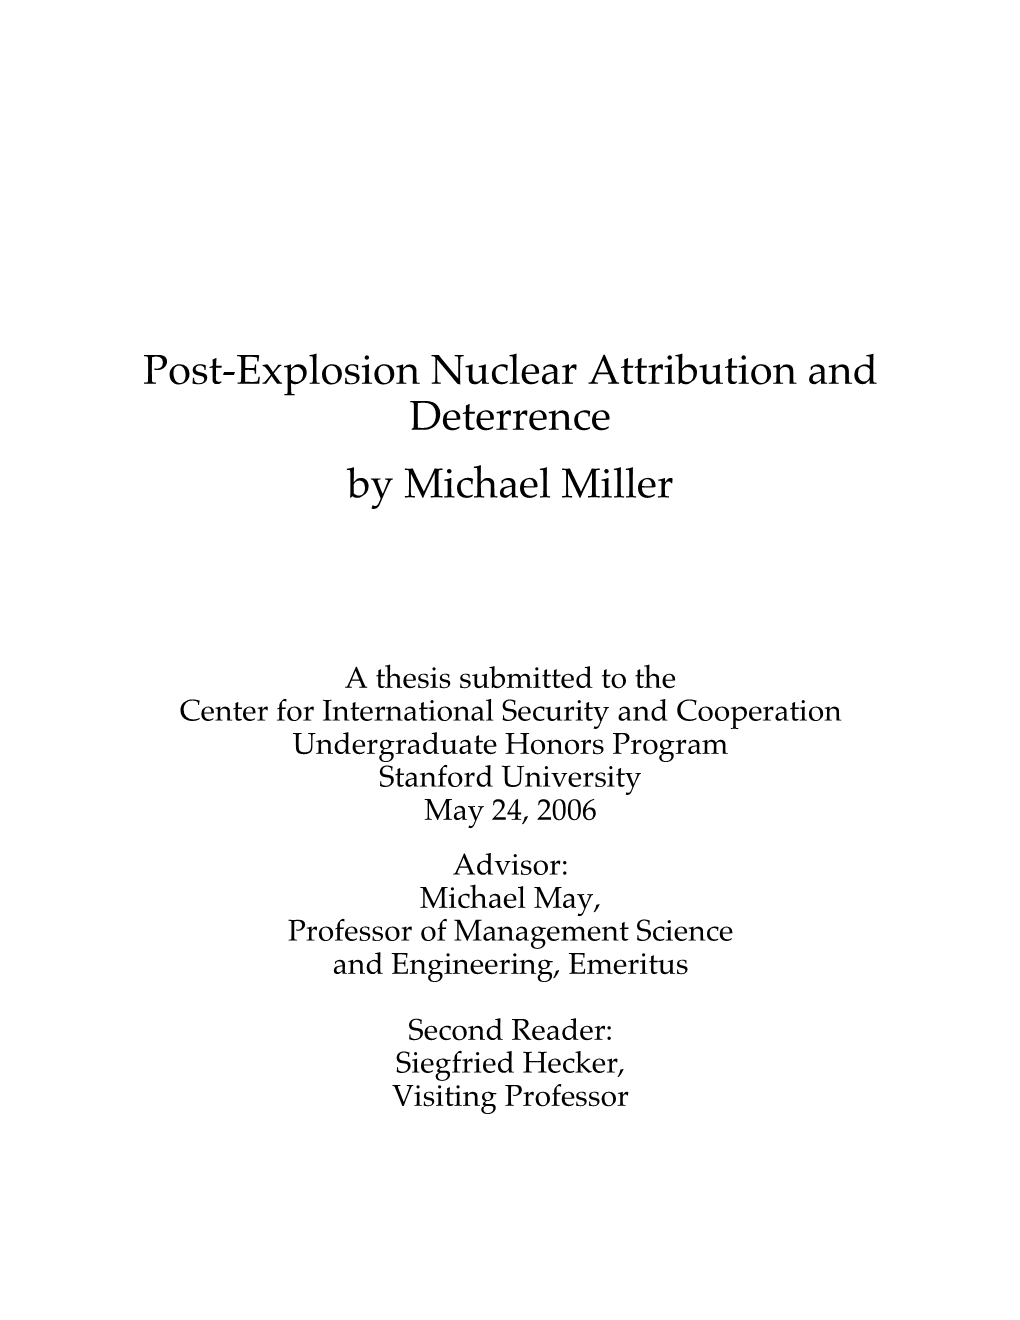 Post-Explosion Nuclear Attribution and Deterrence by Michael Miller